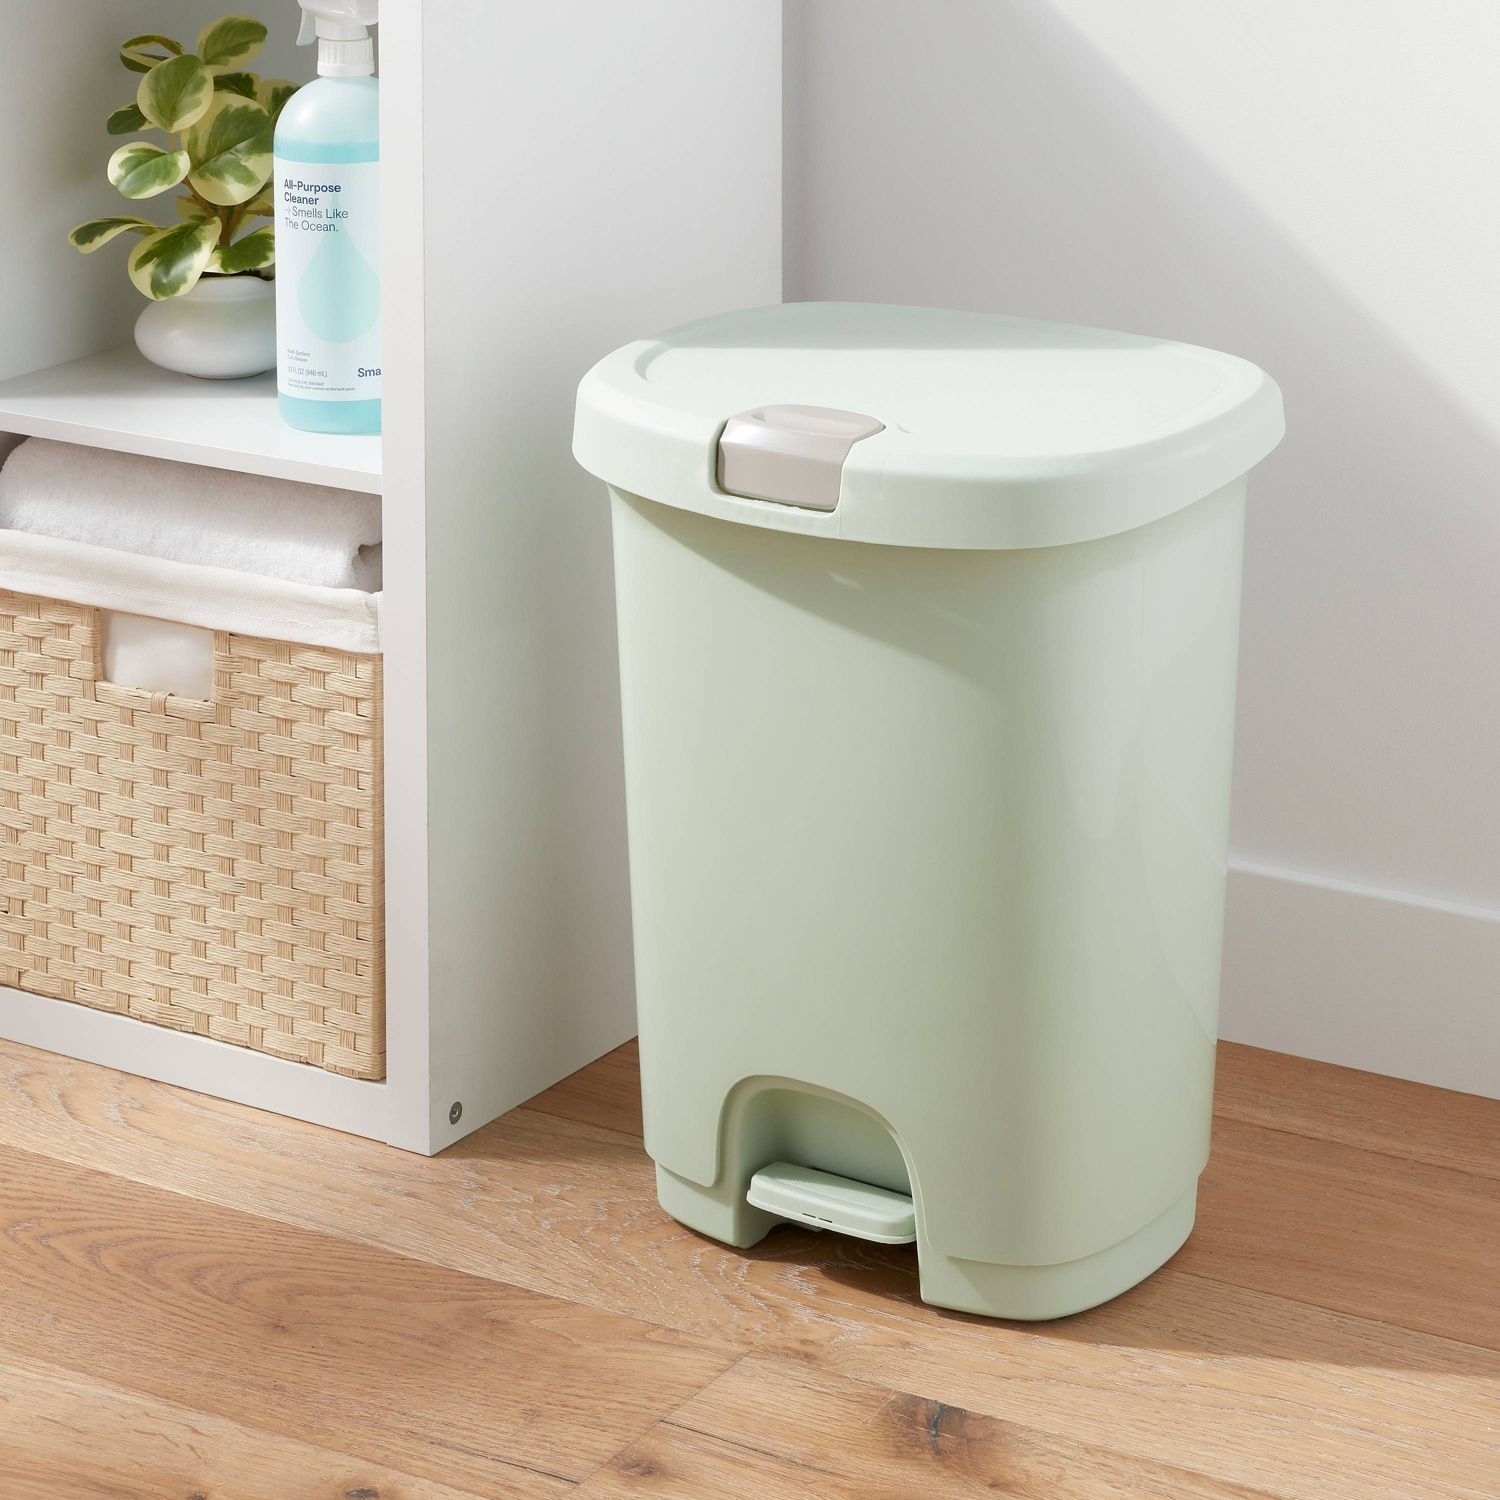 The trash can, featuring a touch button on the lide and a step pedal